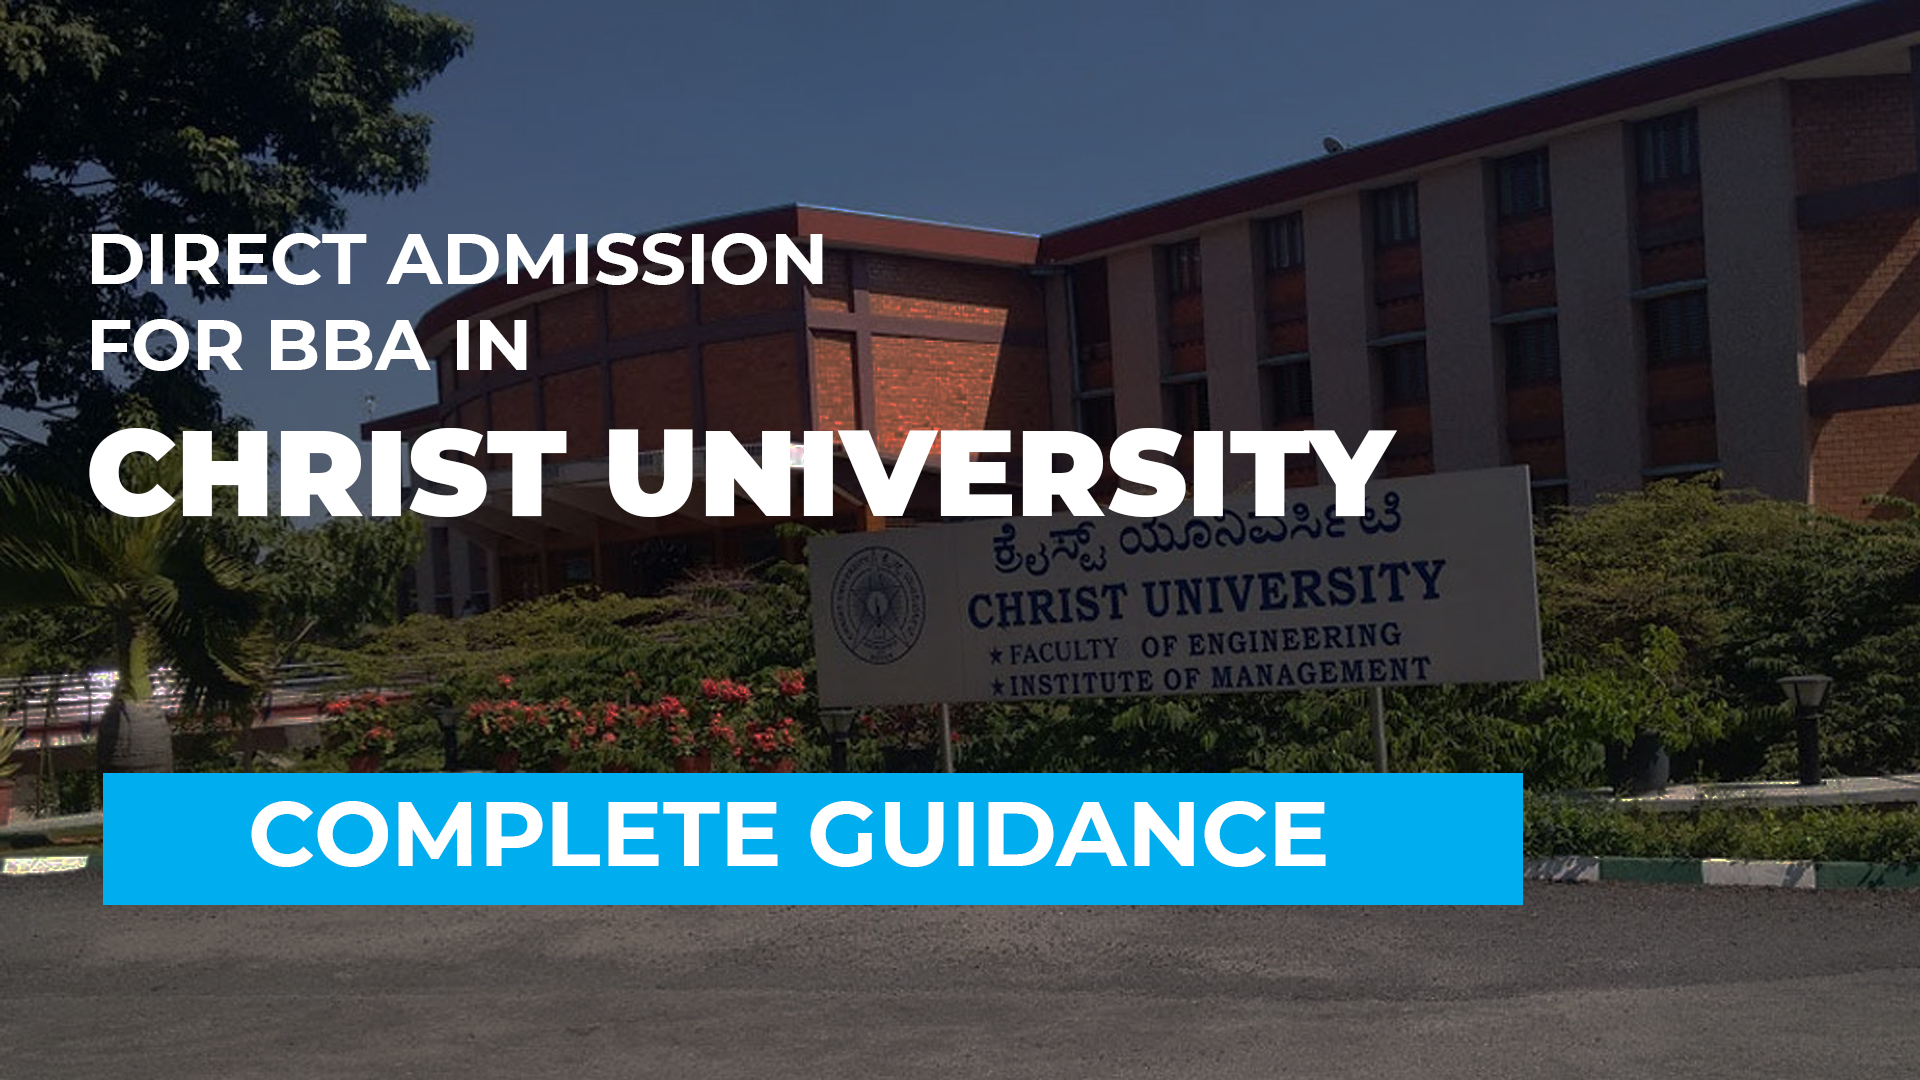 Direct admission in Christ University in BBA